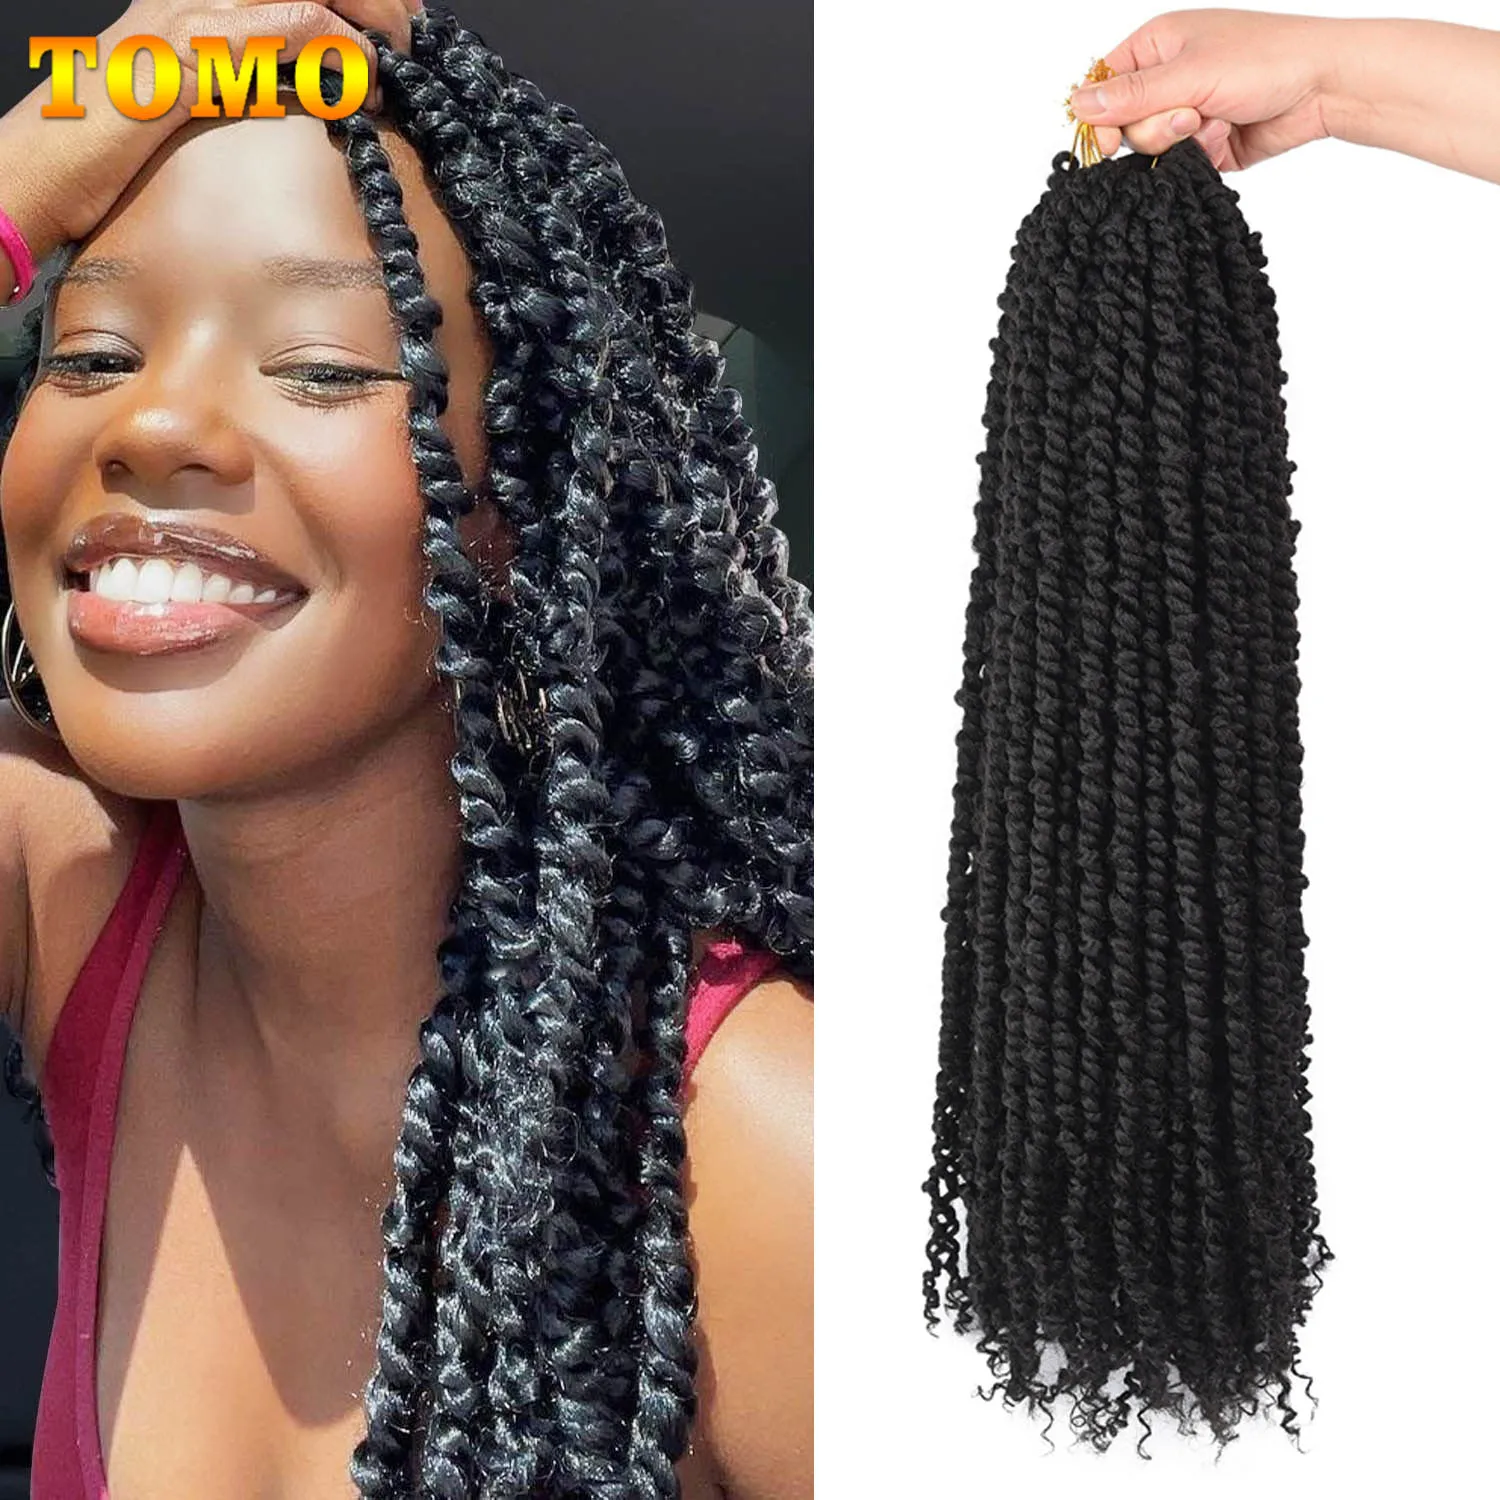 

TOMO Pre-looped Passion Twist Crochet Braids Ombre Long Bohemian Synthetic Braiding Hair Extensions Bomb Twist Hair 12 18 24"